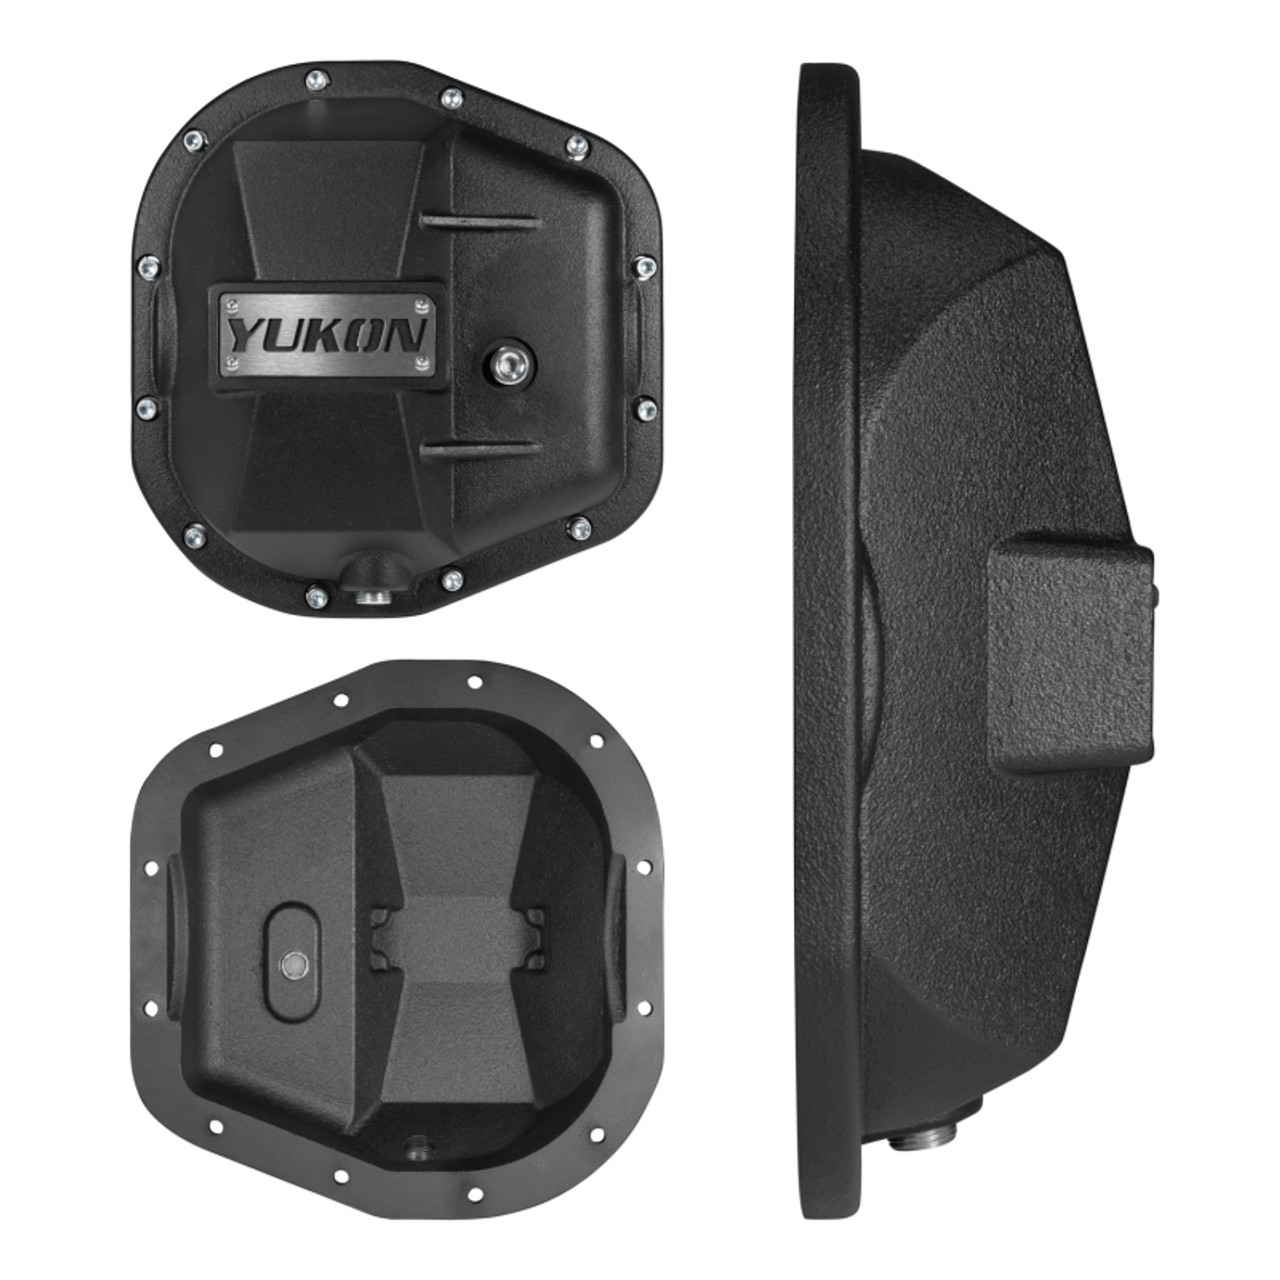 Yukon Gear 97-17 Ford E150 9.75in Rear Differentials Hardcore Cover - YHCC-F10.5 Photo - out of package